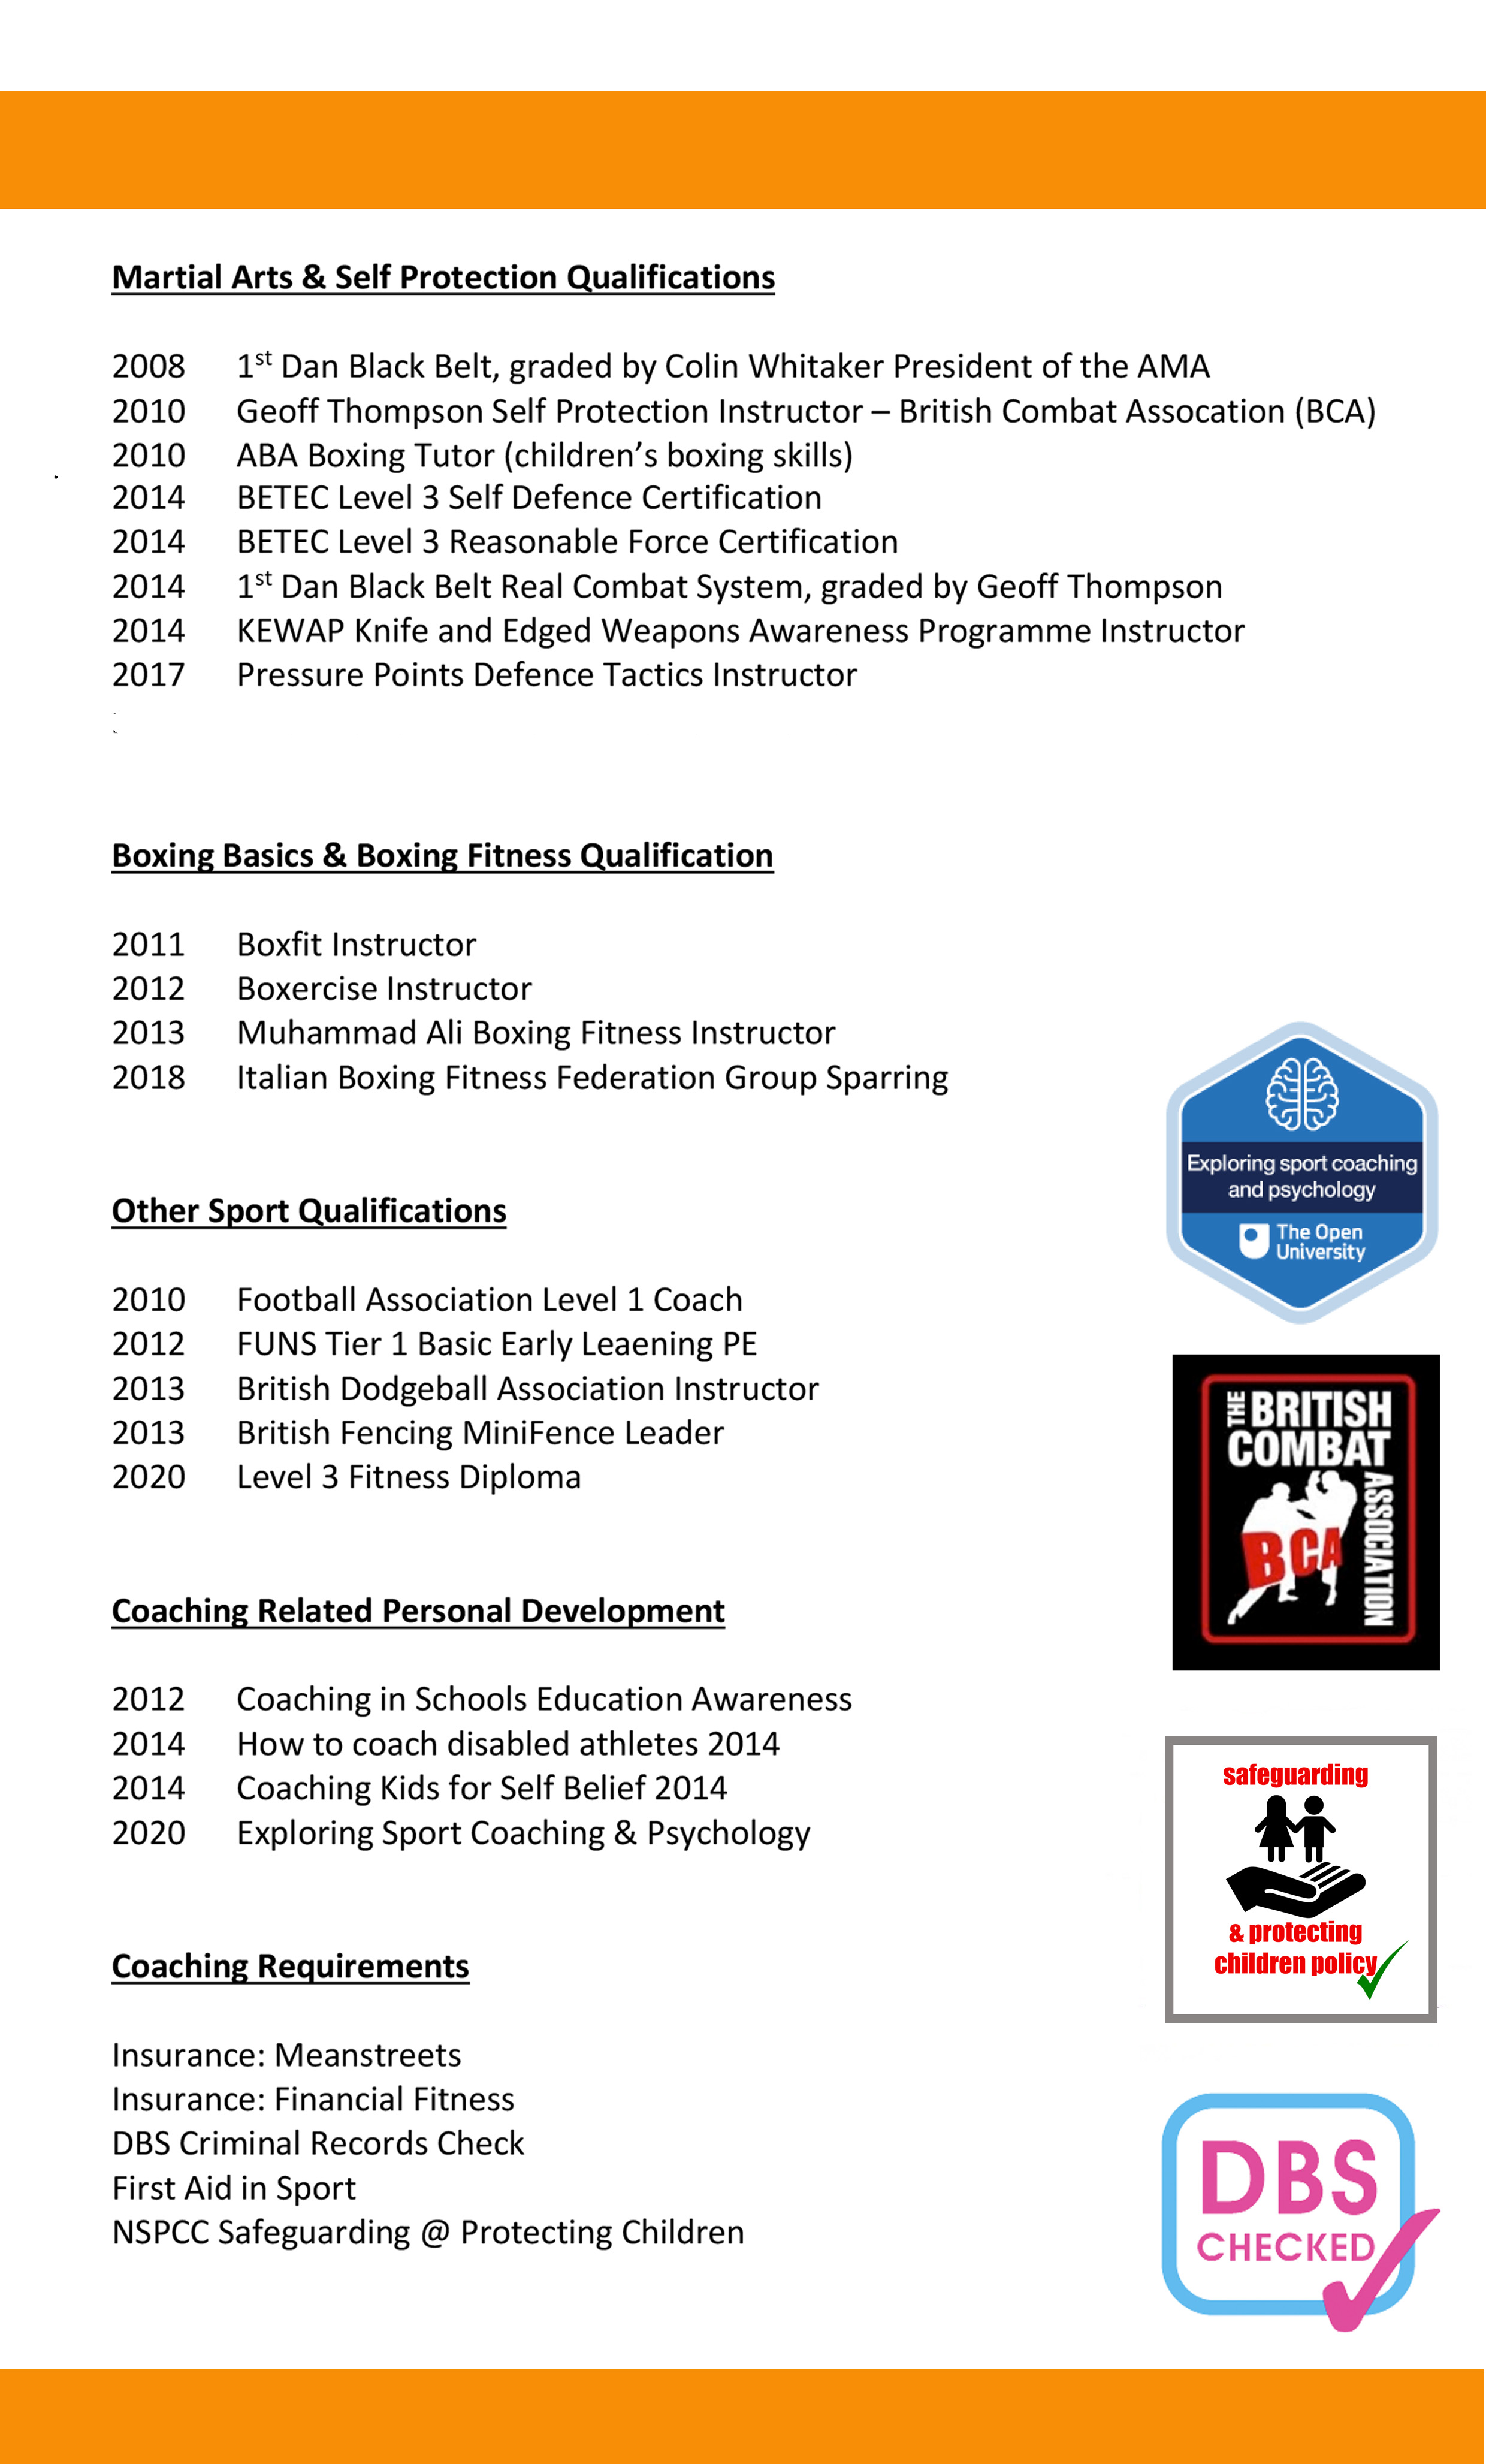 Coaching Qualifications